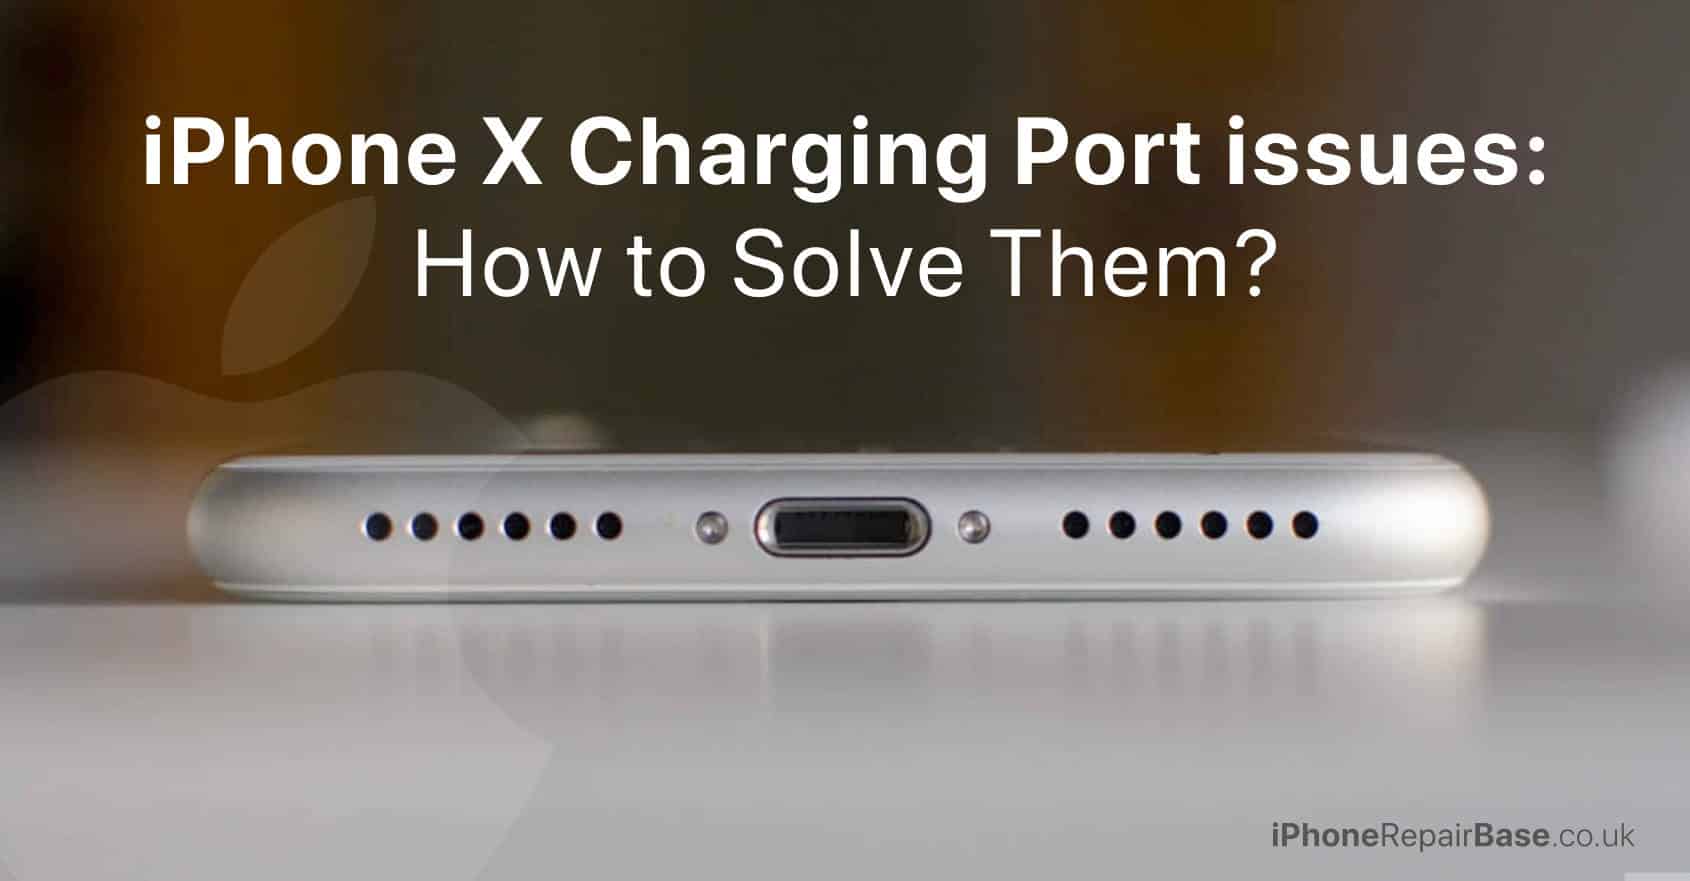 My iPhone Charging Port is not Working Properly - charger port issues, problems, solutions